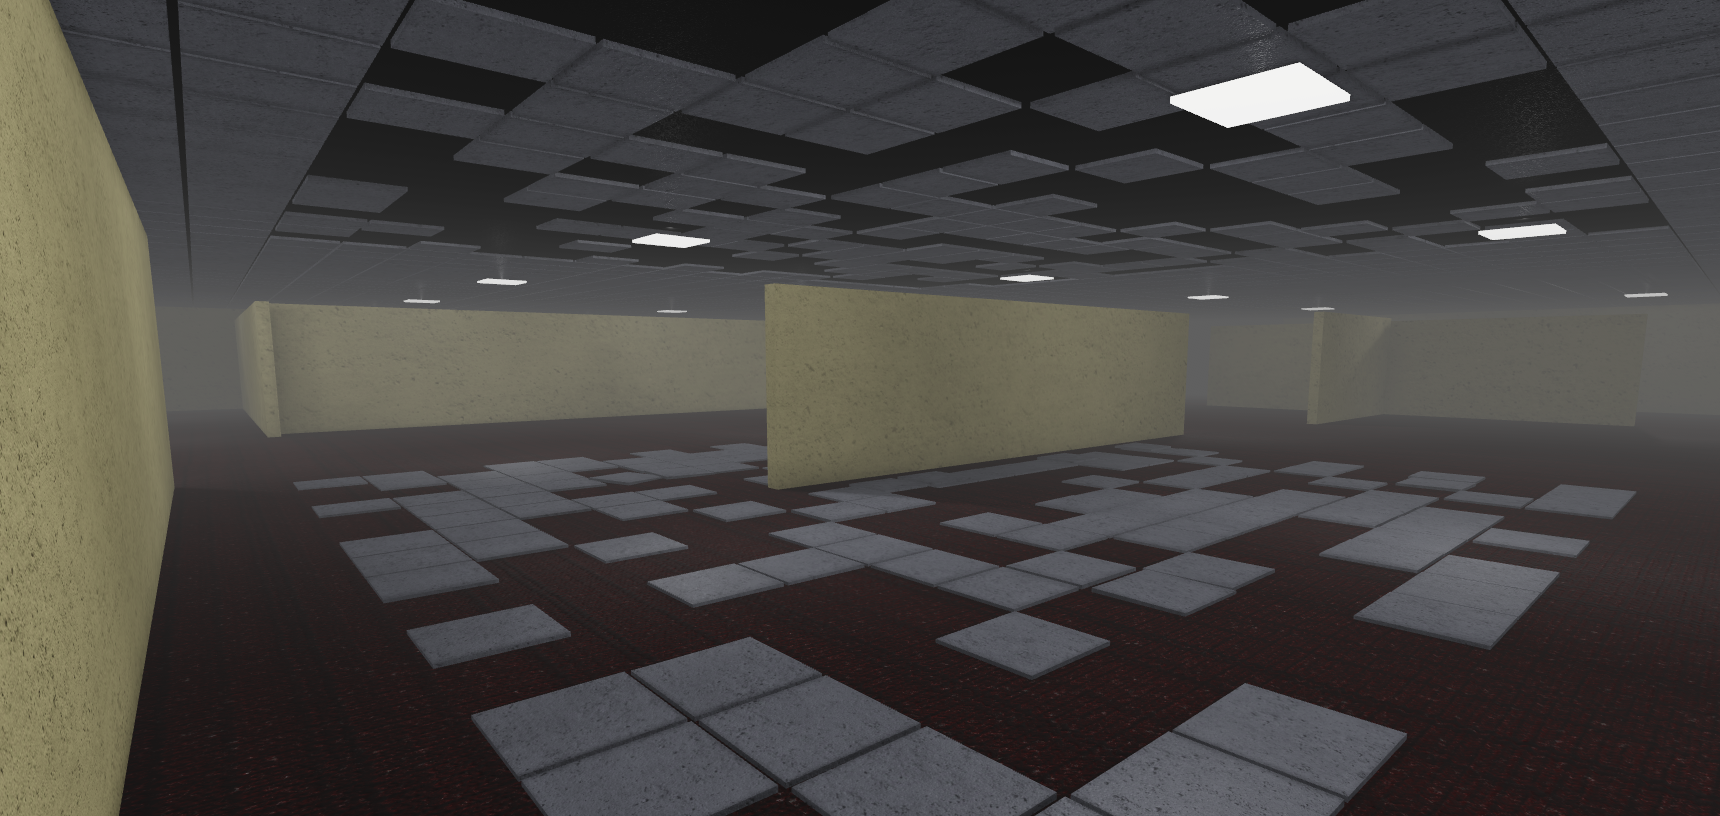 Level 0.2 Remodeled Mess [Backrooms Wikidot] 